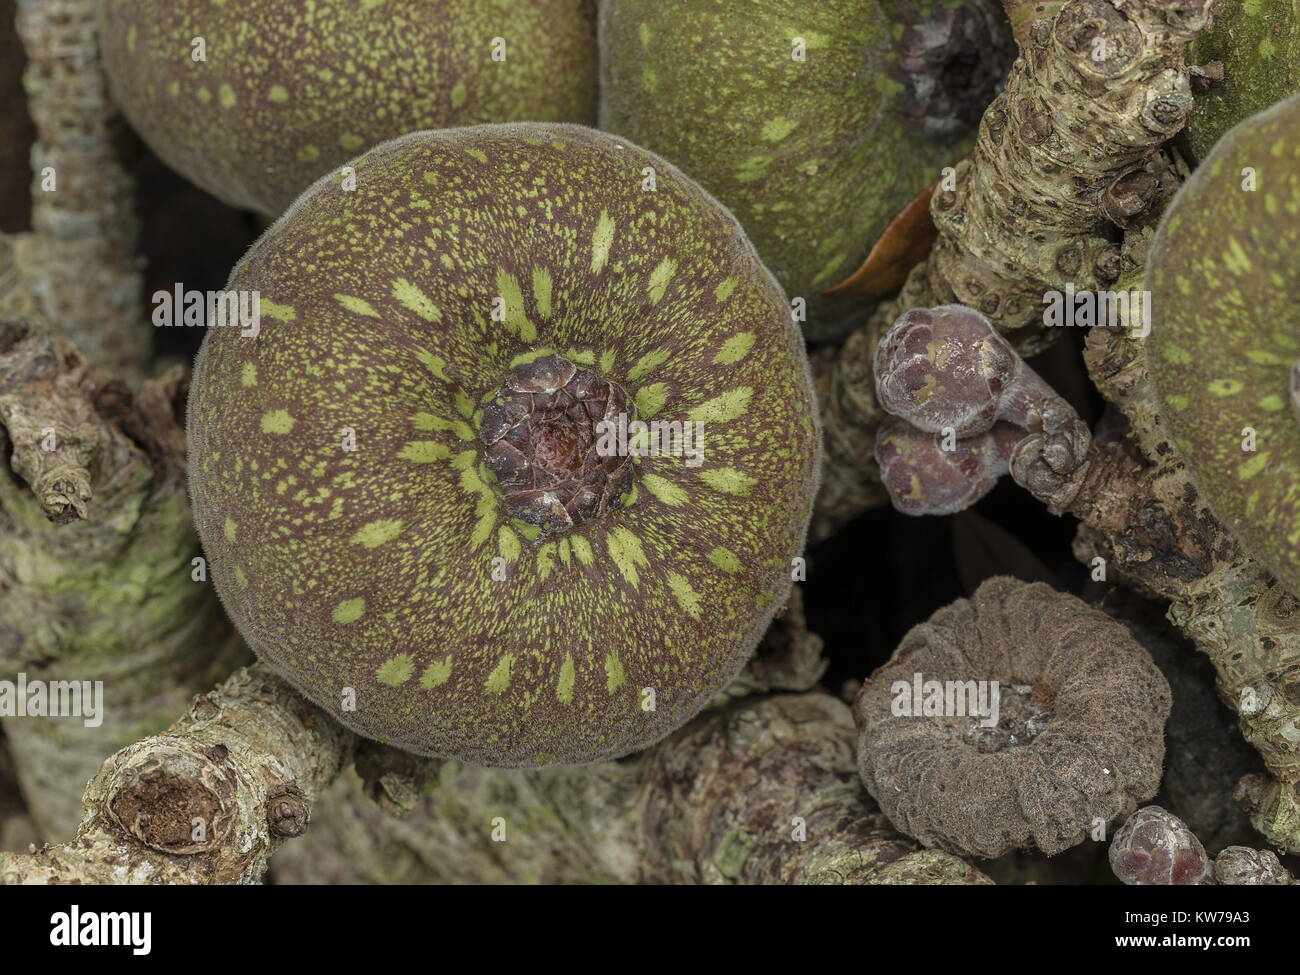 The ripe fruit of Roxburgh Figs, Ficus auriculata, from South-east Asia. Stock Photo